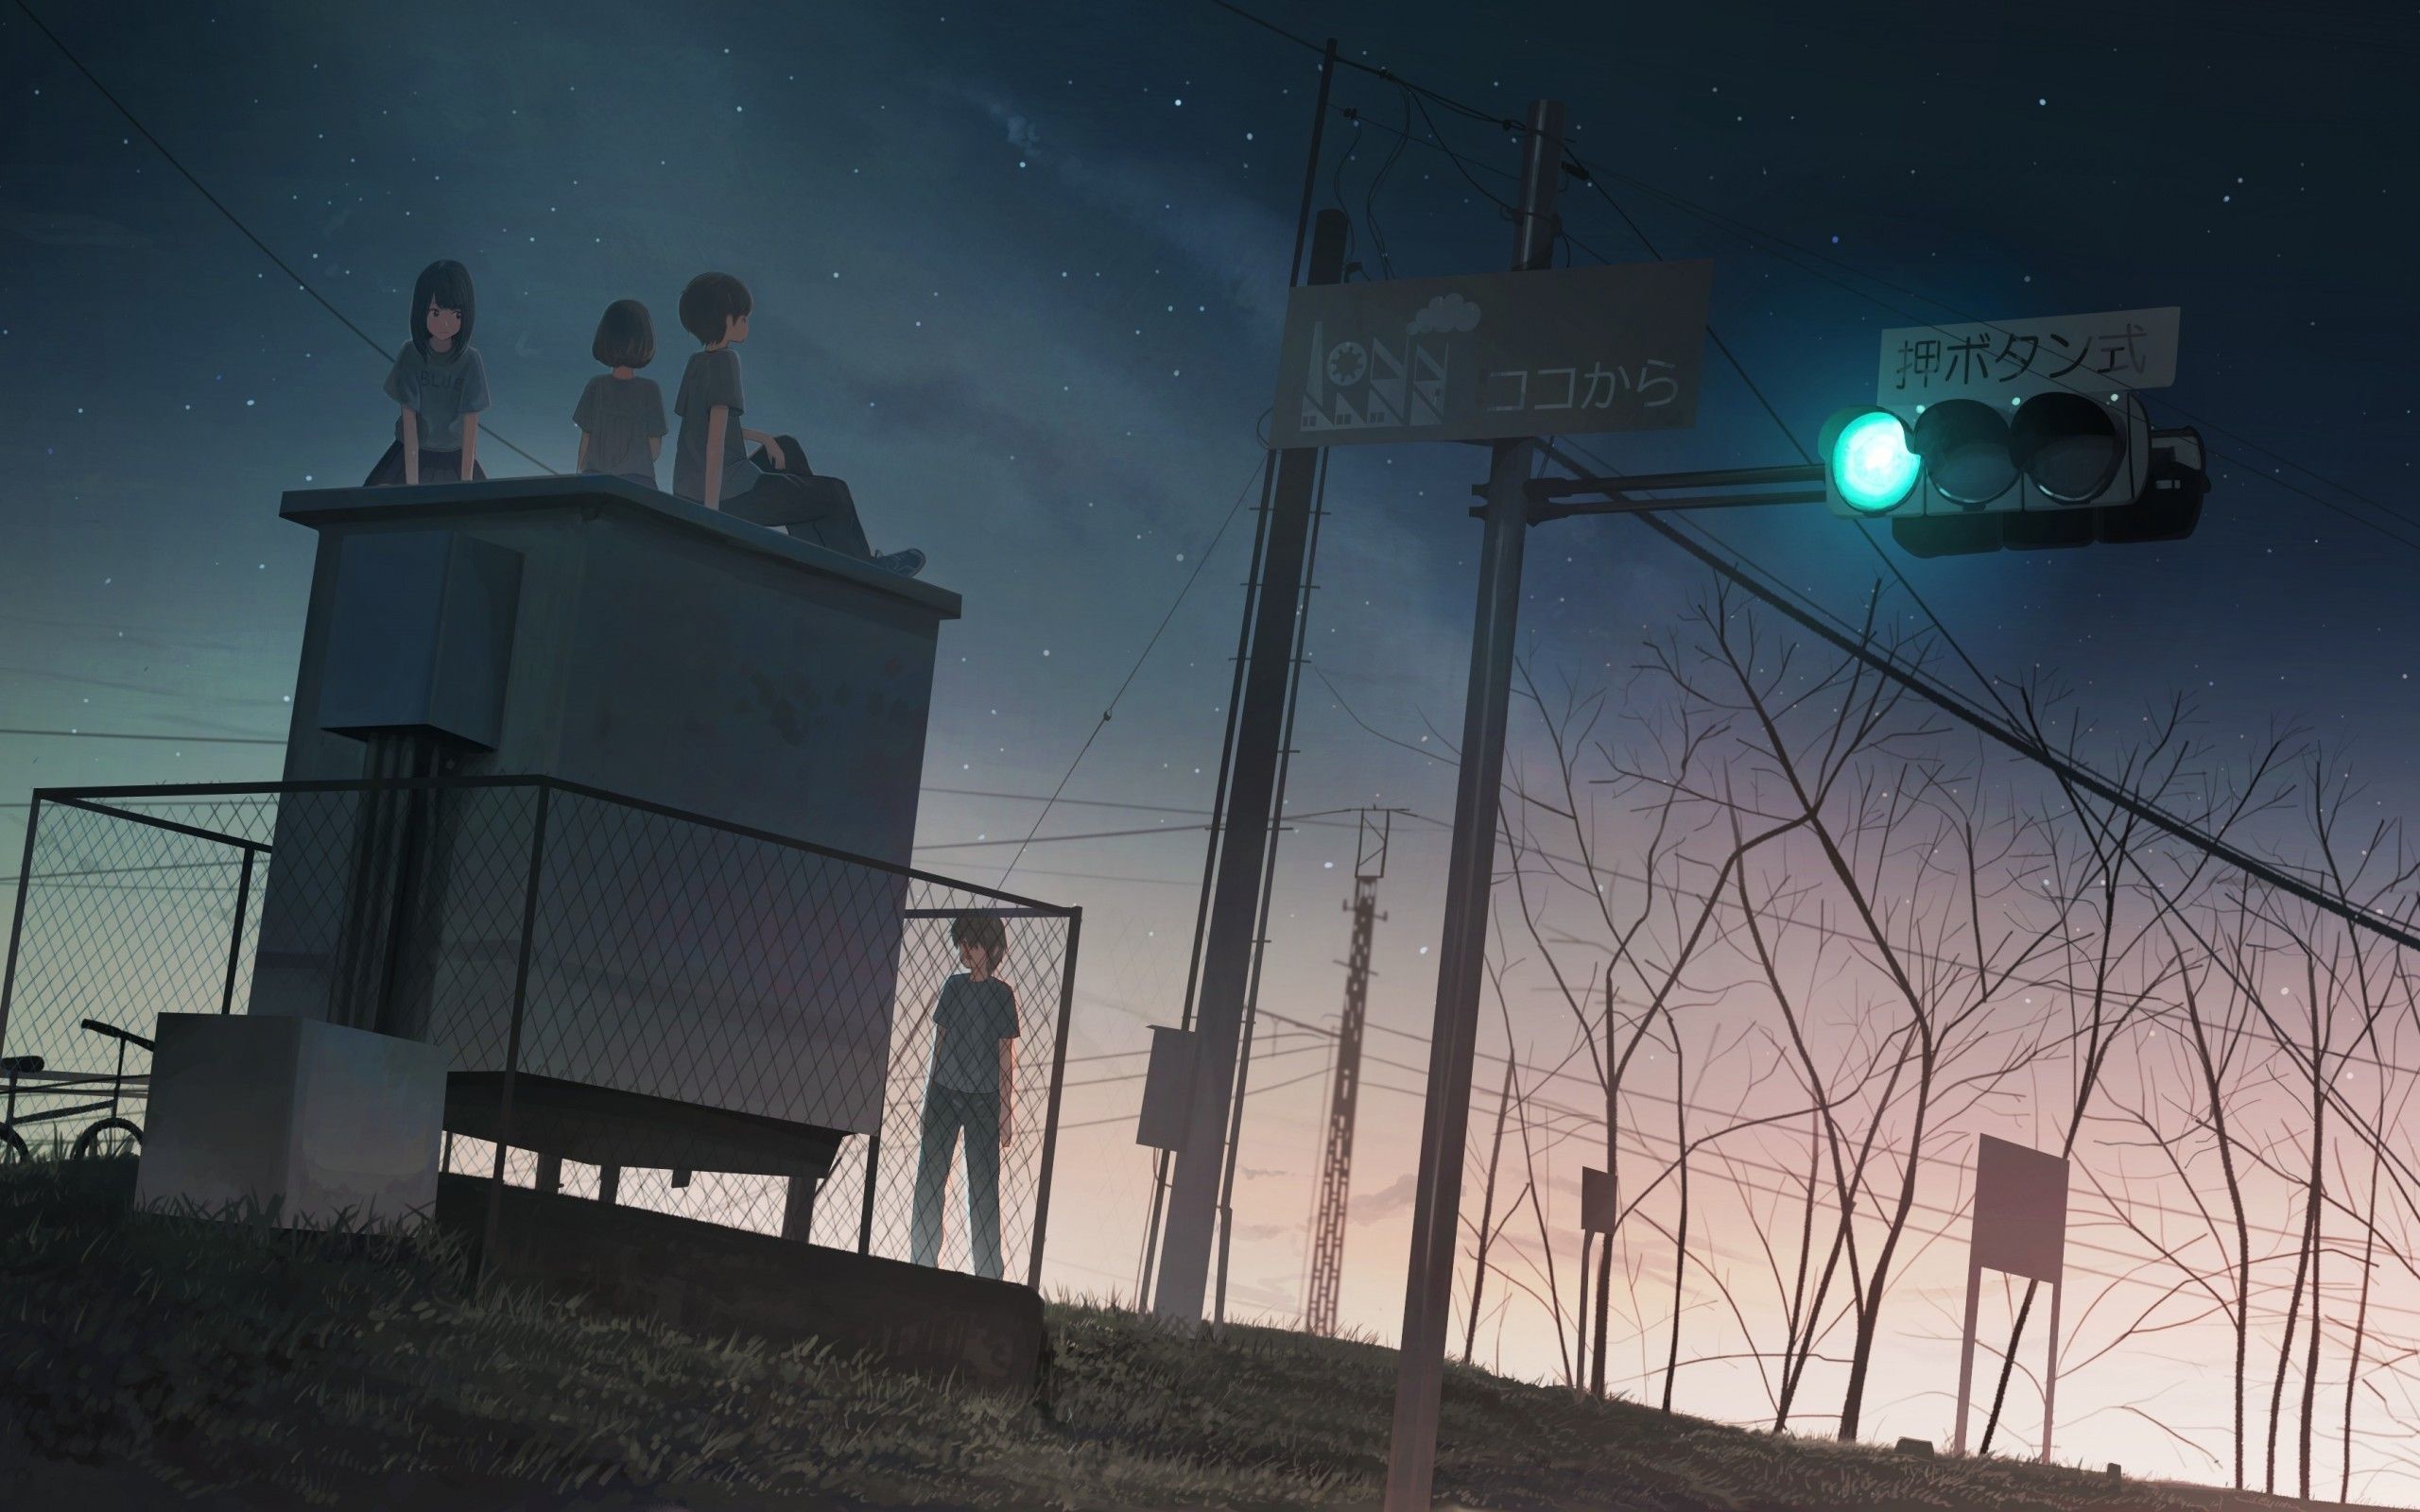 Download 2560x1600 Anime Girl And Guys, Rooftop, Scenic, Stars